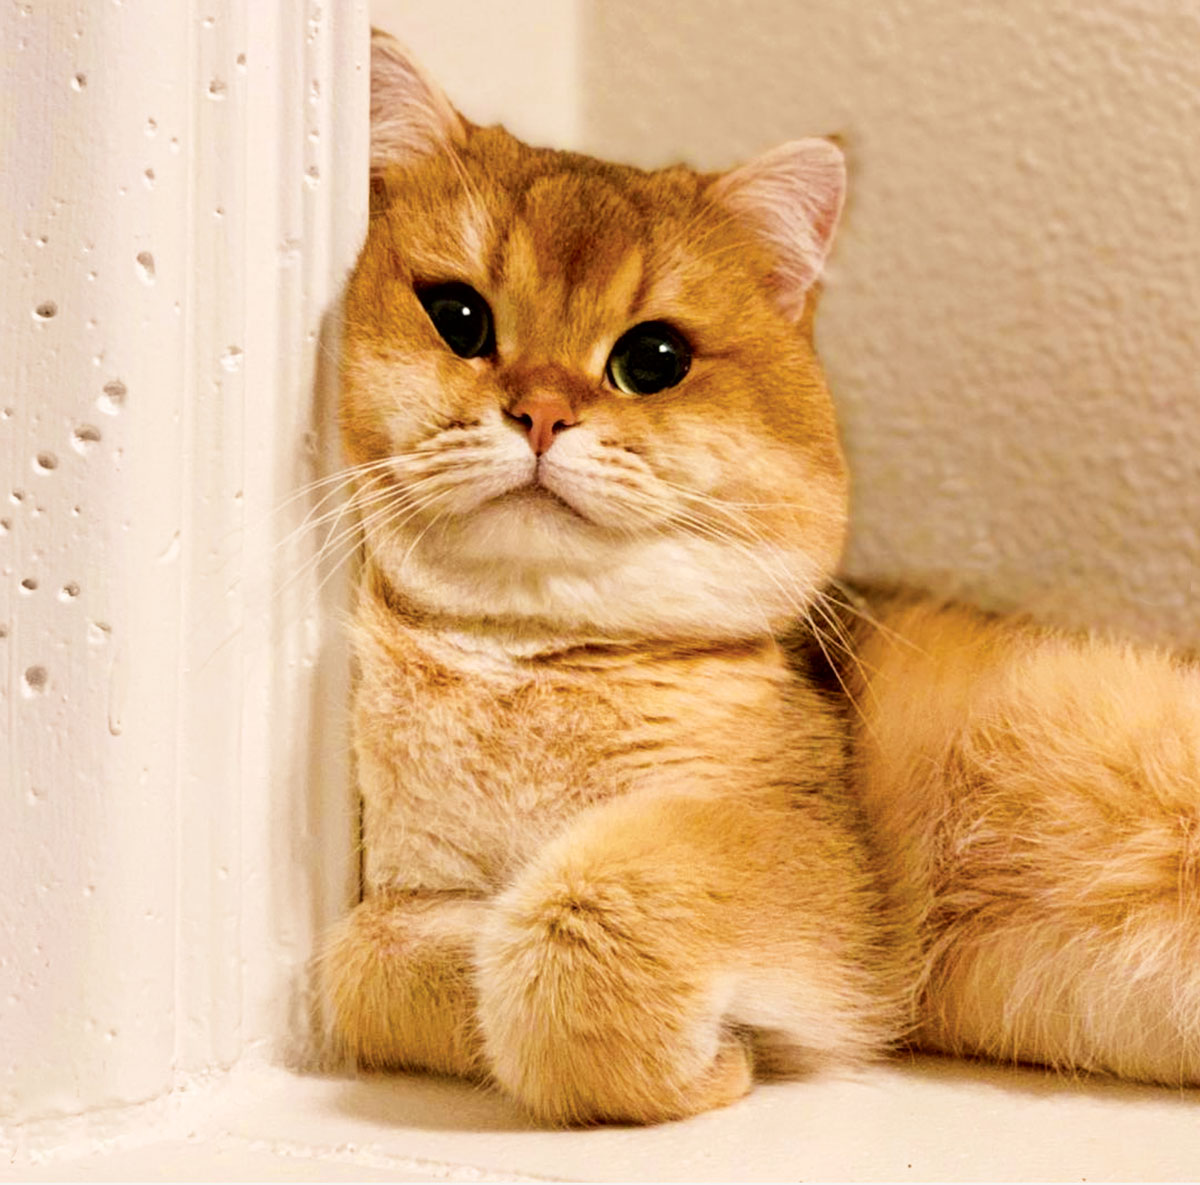 Cuteness Overload! Instagram Cats You Need to Follow - Modern Cat